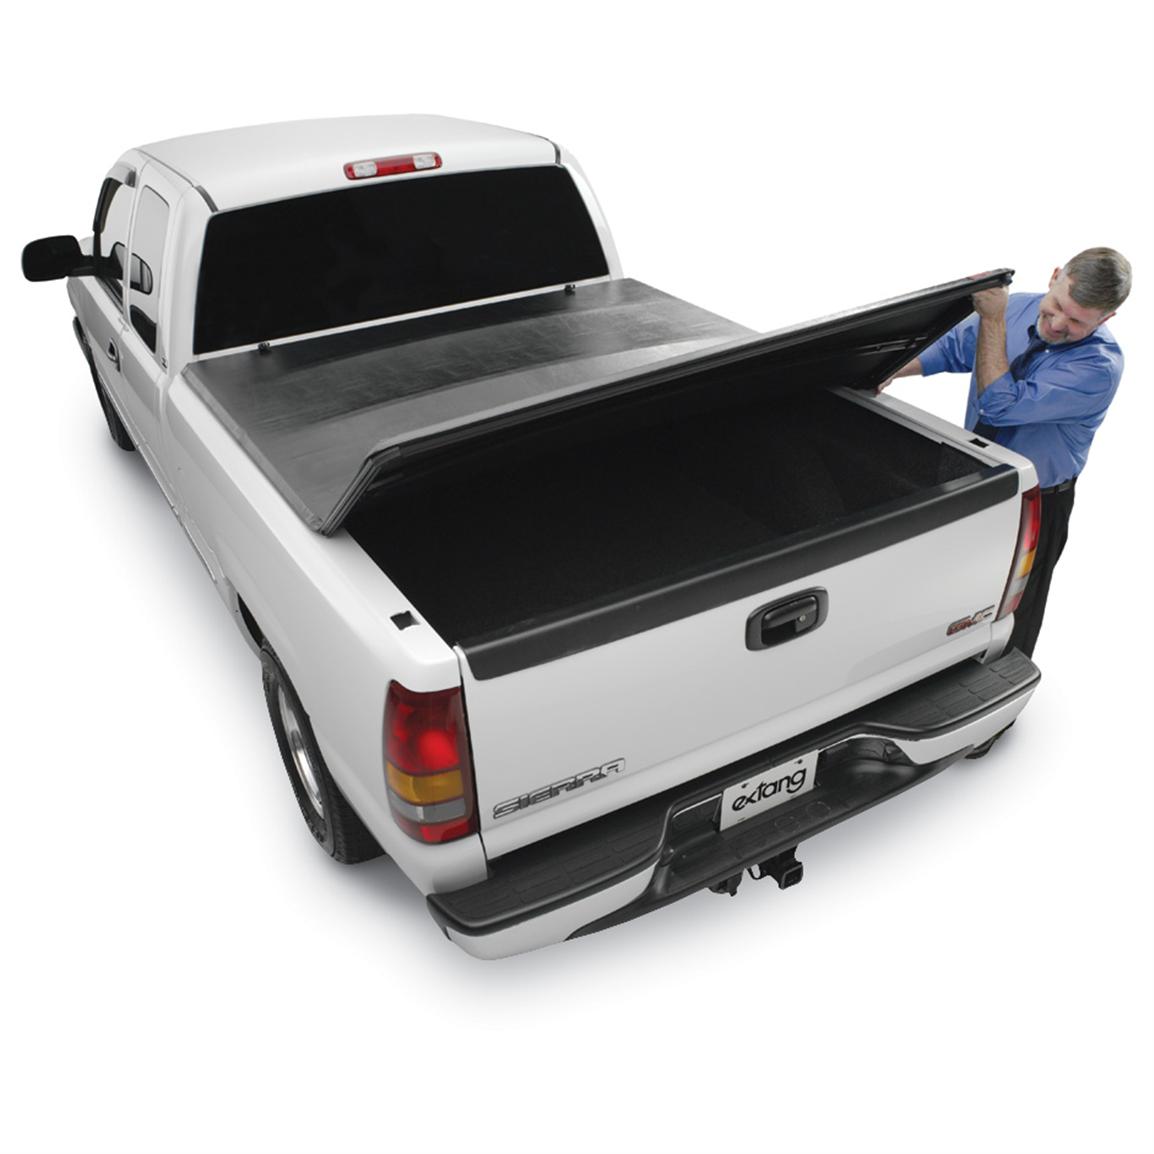 Extang Trifecta Tonneau Cover 167009 Accessories At Sportsman39s Guide